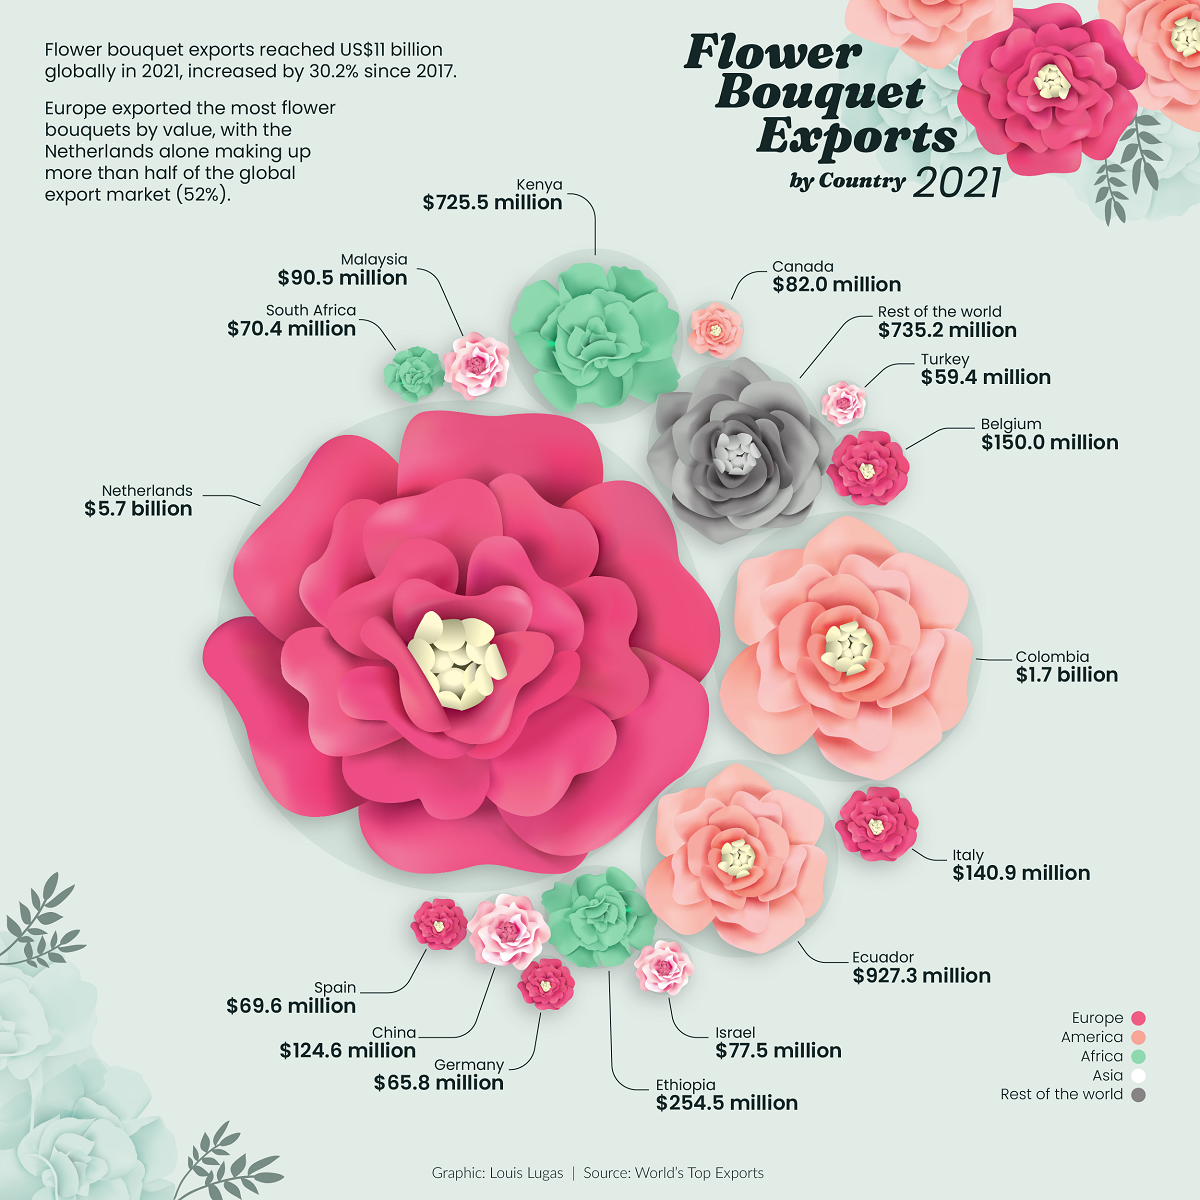 flower bouquet exports by country